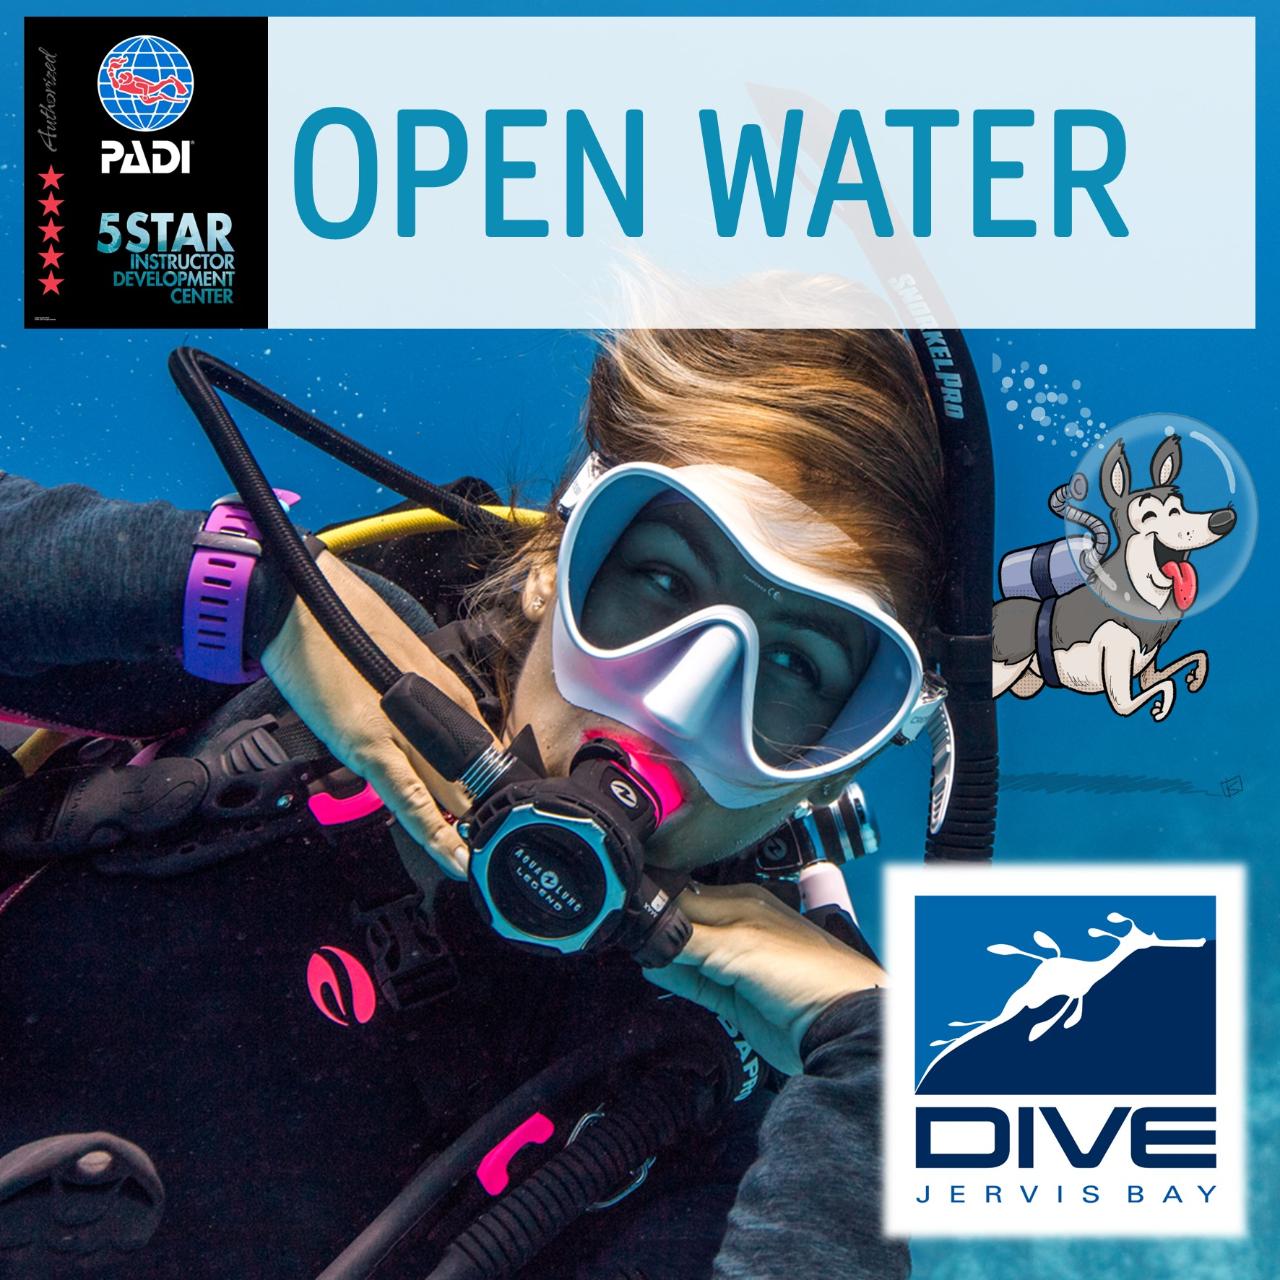 PADI OPEN WATER COURSE